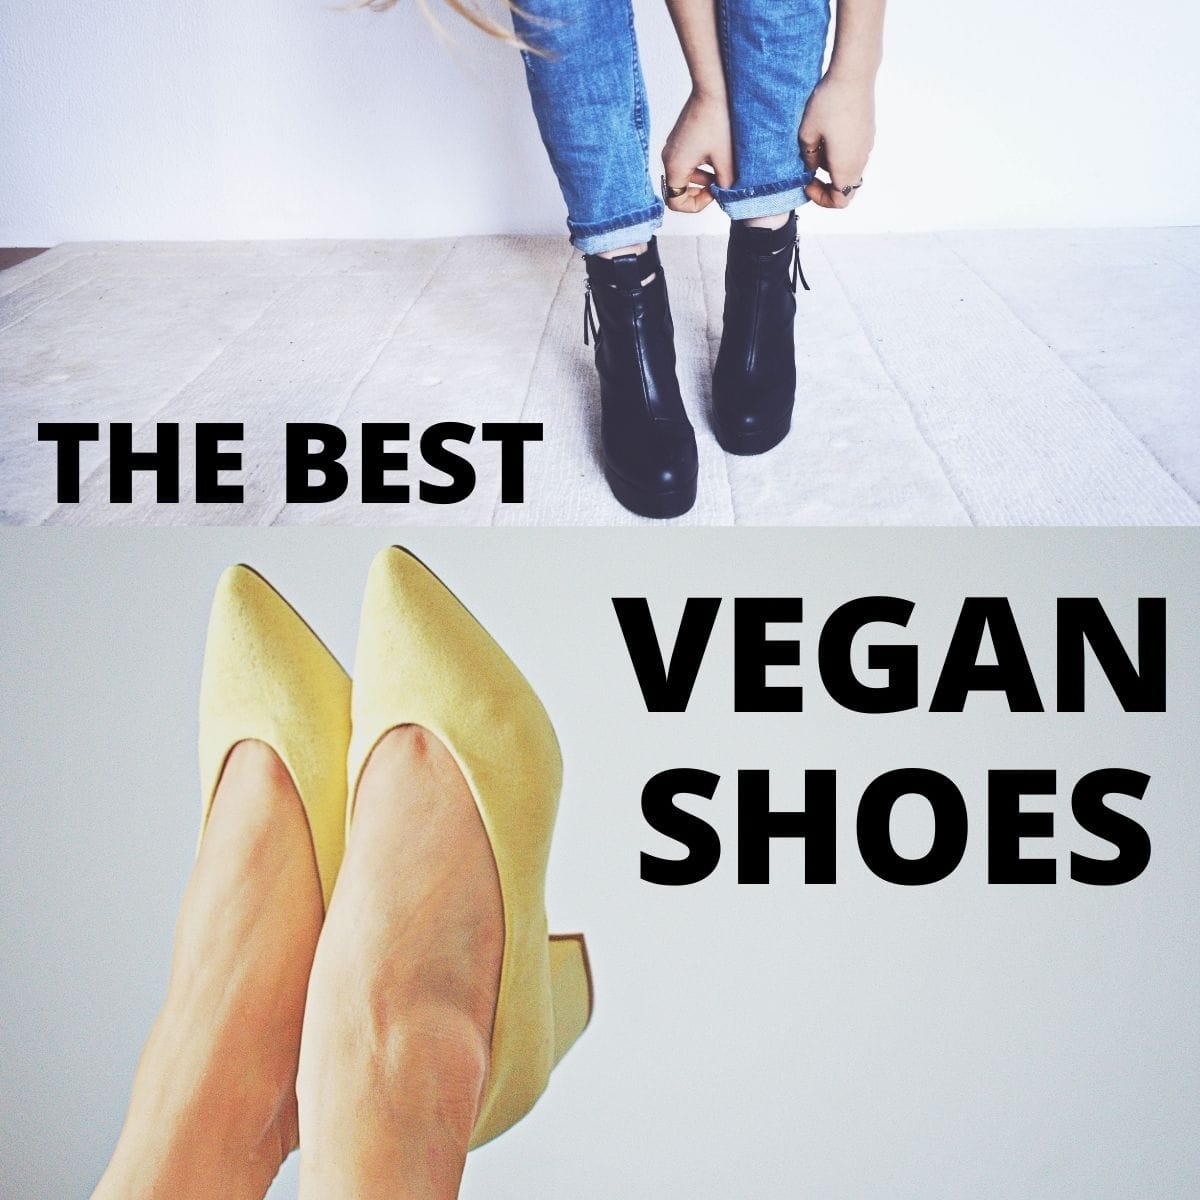 A black pair of shoes and a yellow pair of shoes on women's feet, with text that says, "The Best Vegan Shoes."